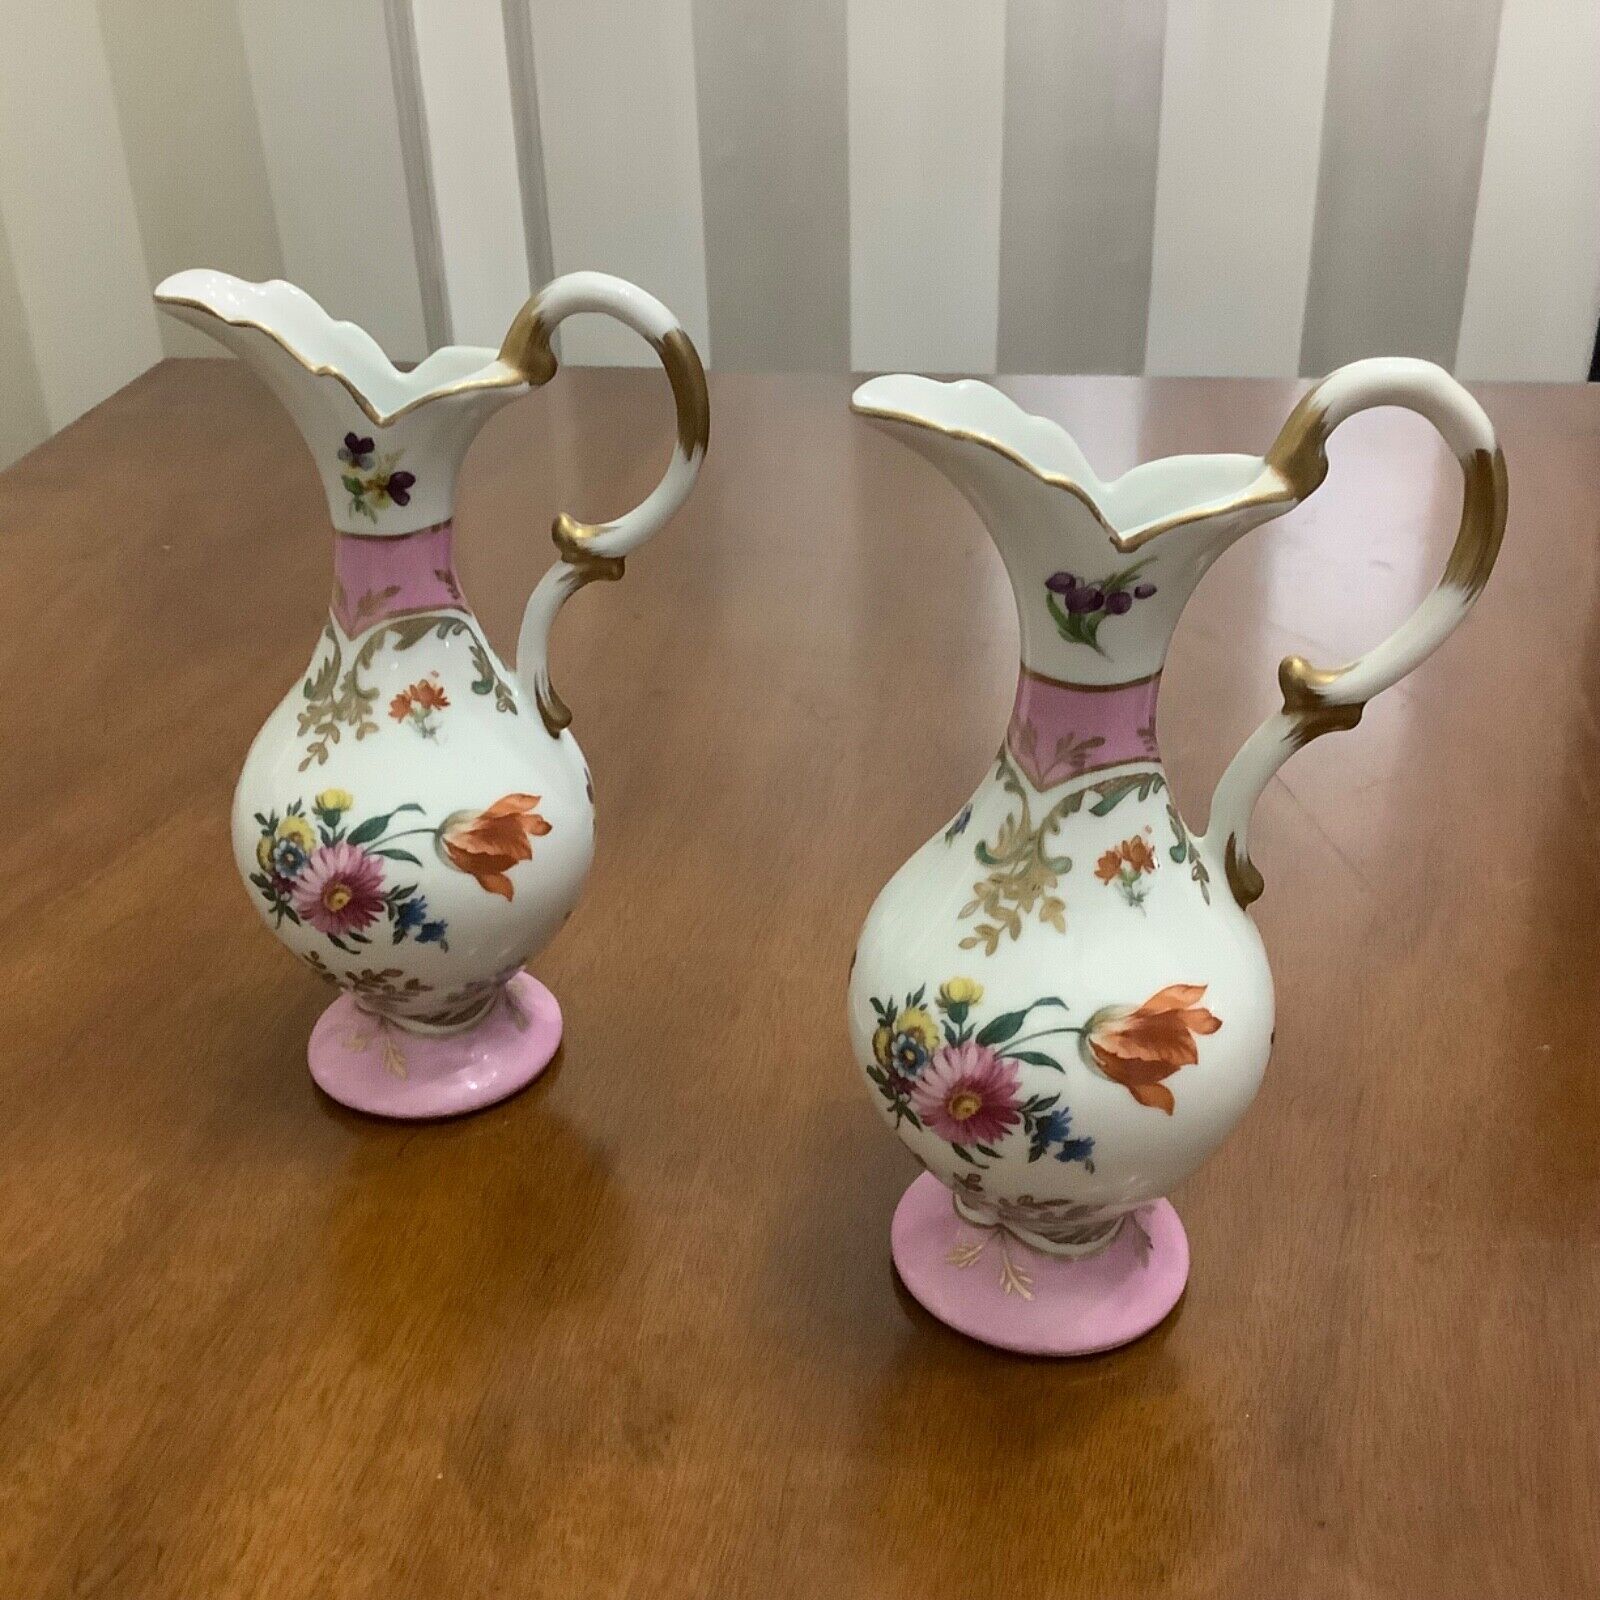 Two decorative floral pitchers, Heirloom by Toyo